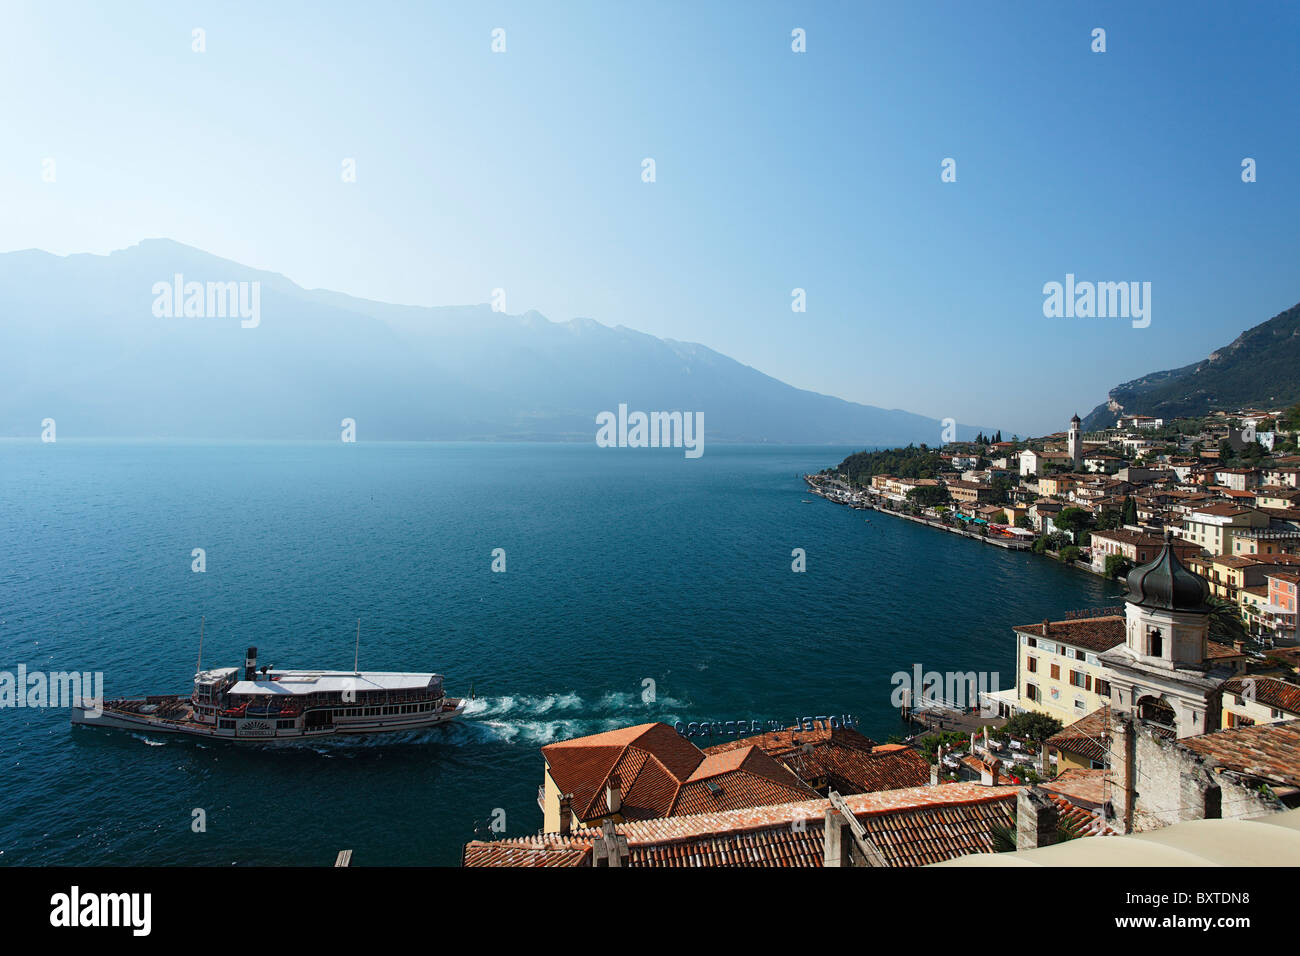 Excursion boat, view over Limone, Lake Garda, Lombardy, Italy ...